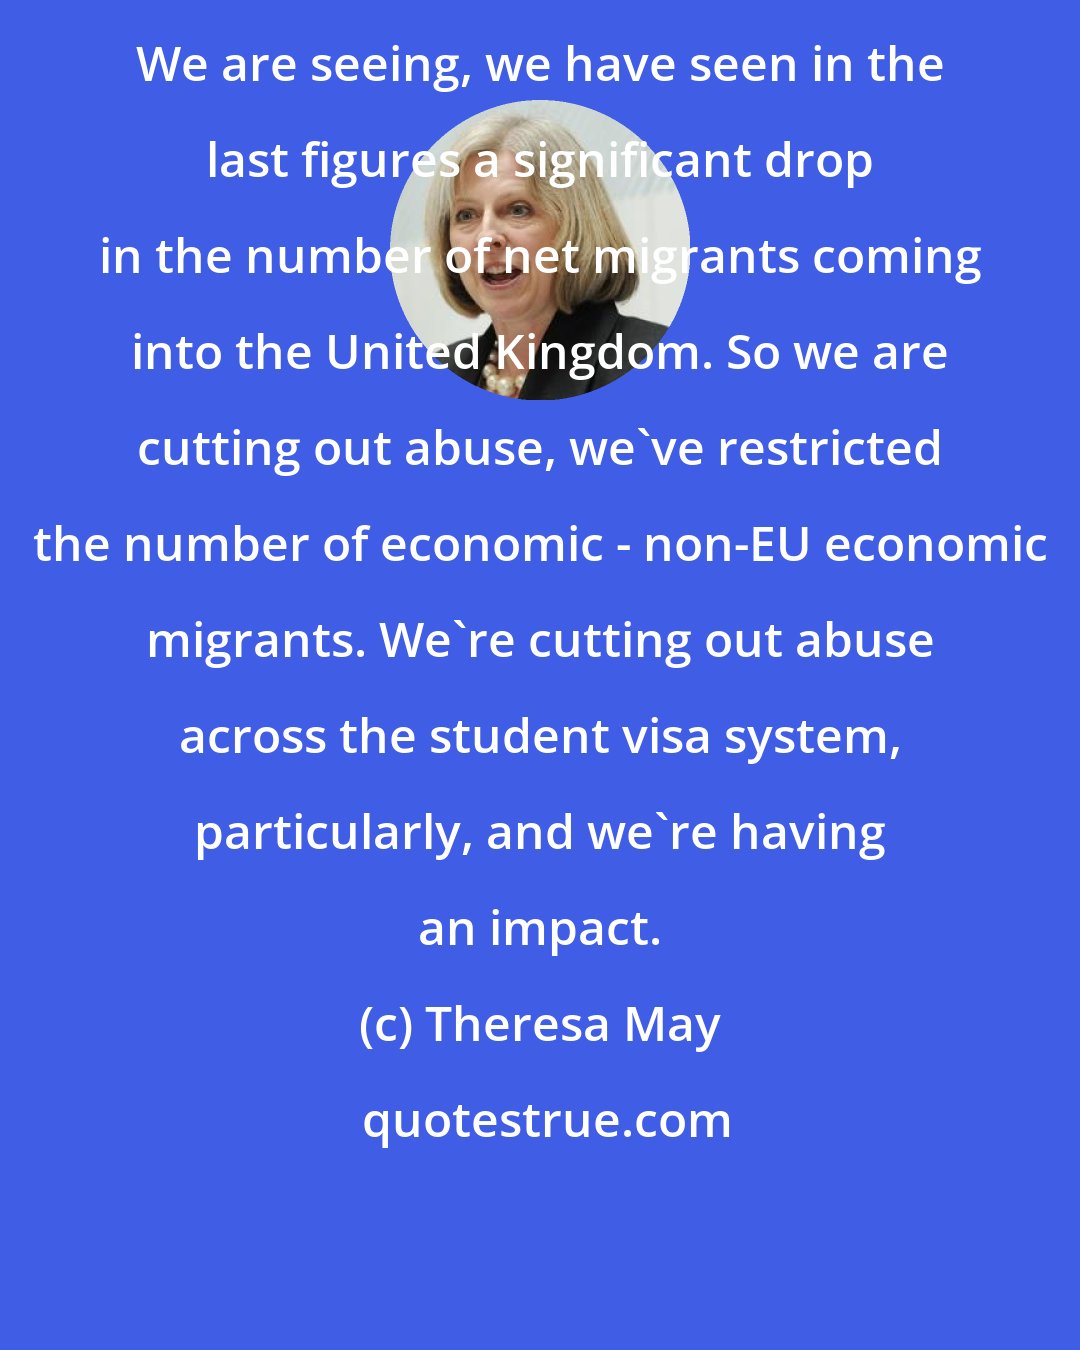 Theresa May: We are seeing, we have seen in the last figures a significant drop in the number of net migrants coming into the United Kingdom. So we are cutting out abuse, we've restricted the number of economic - non-EU economic migrants. We're cutting out abuse across the student visa system, particularly, and we're having an impact.